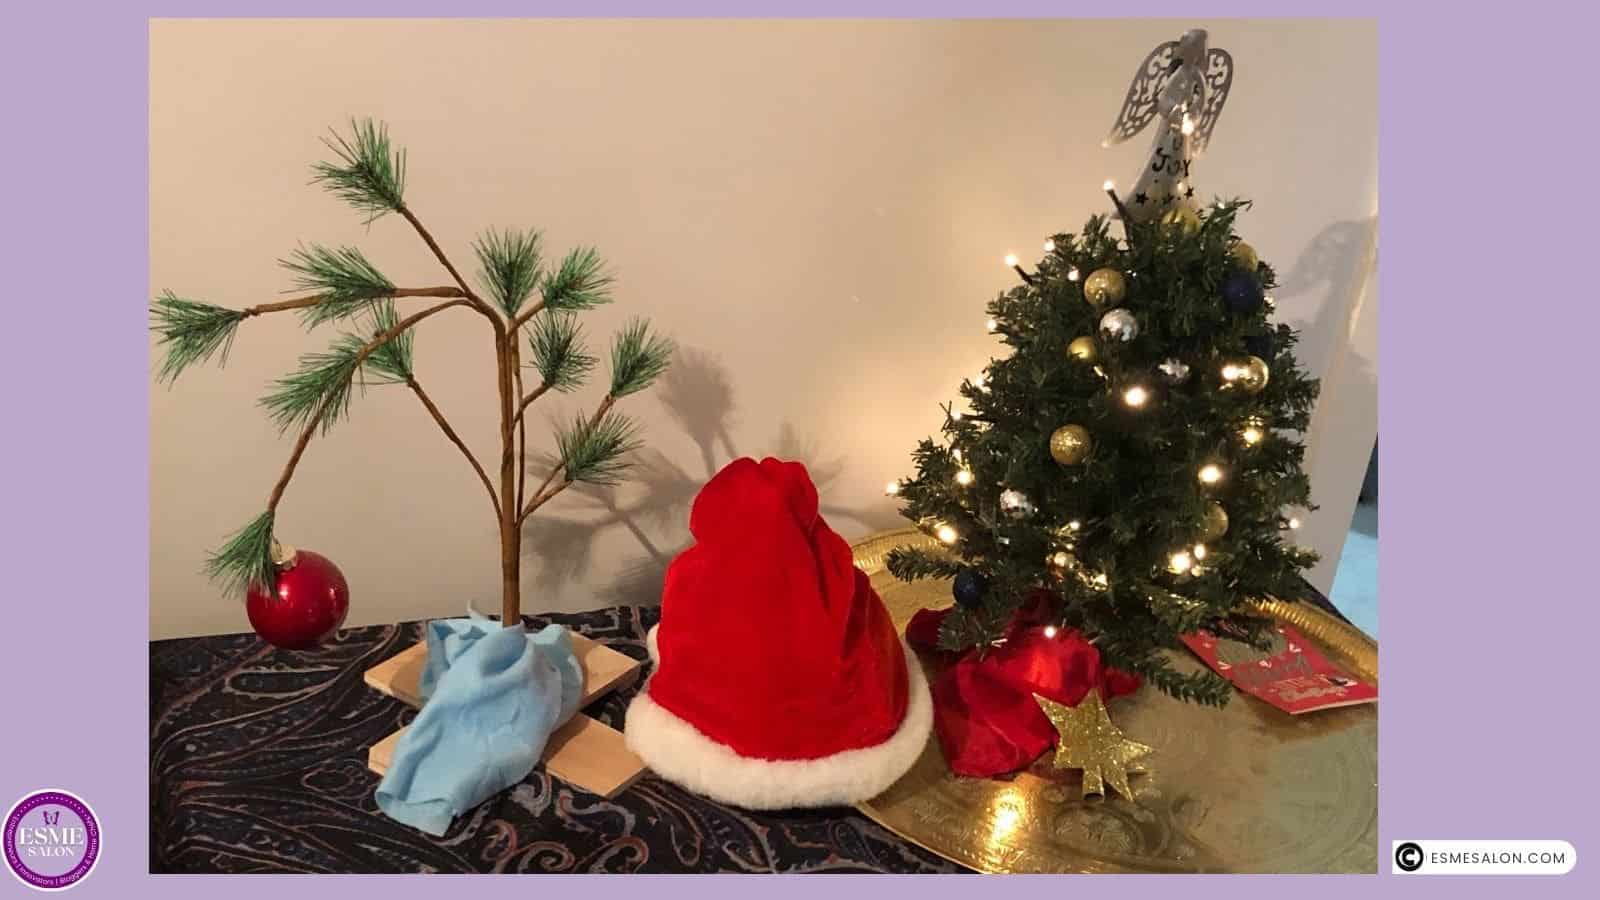 an image of Charlie Brown's Blue Spruce, a Red Christmas Hat and a Miniature Christmas Tree with lights